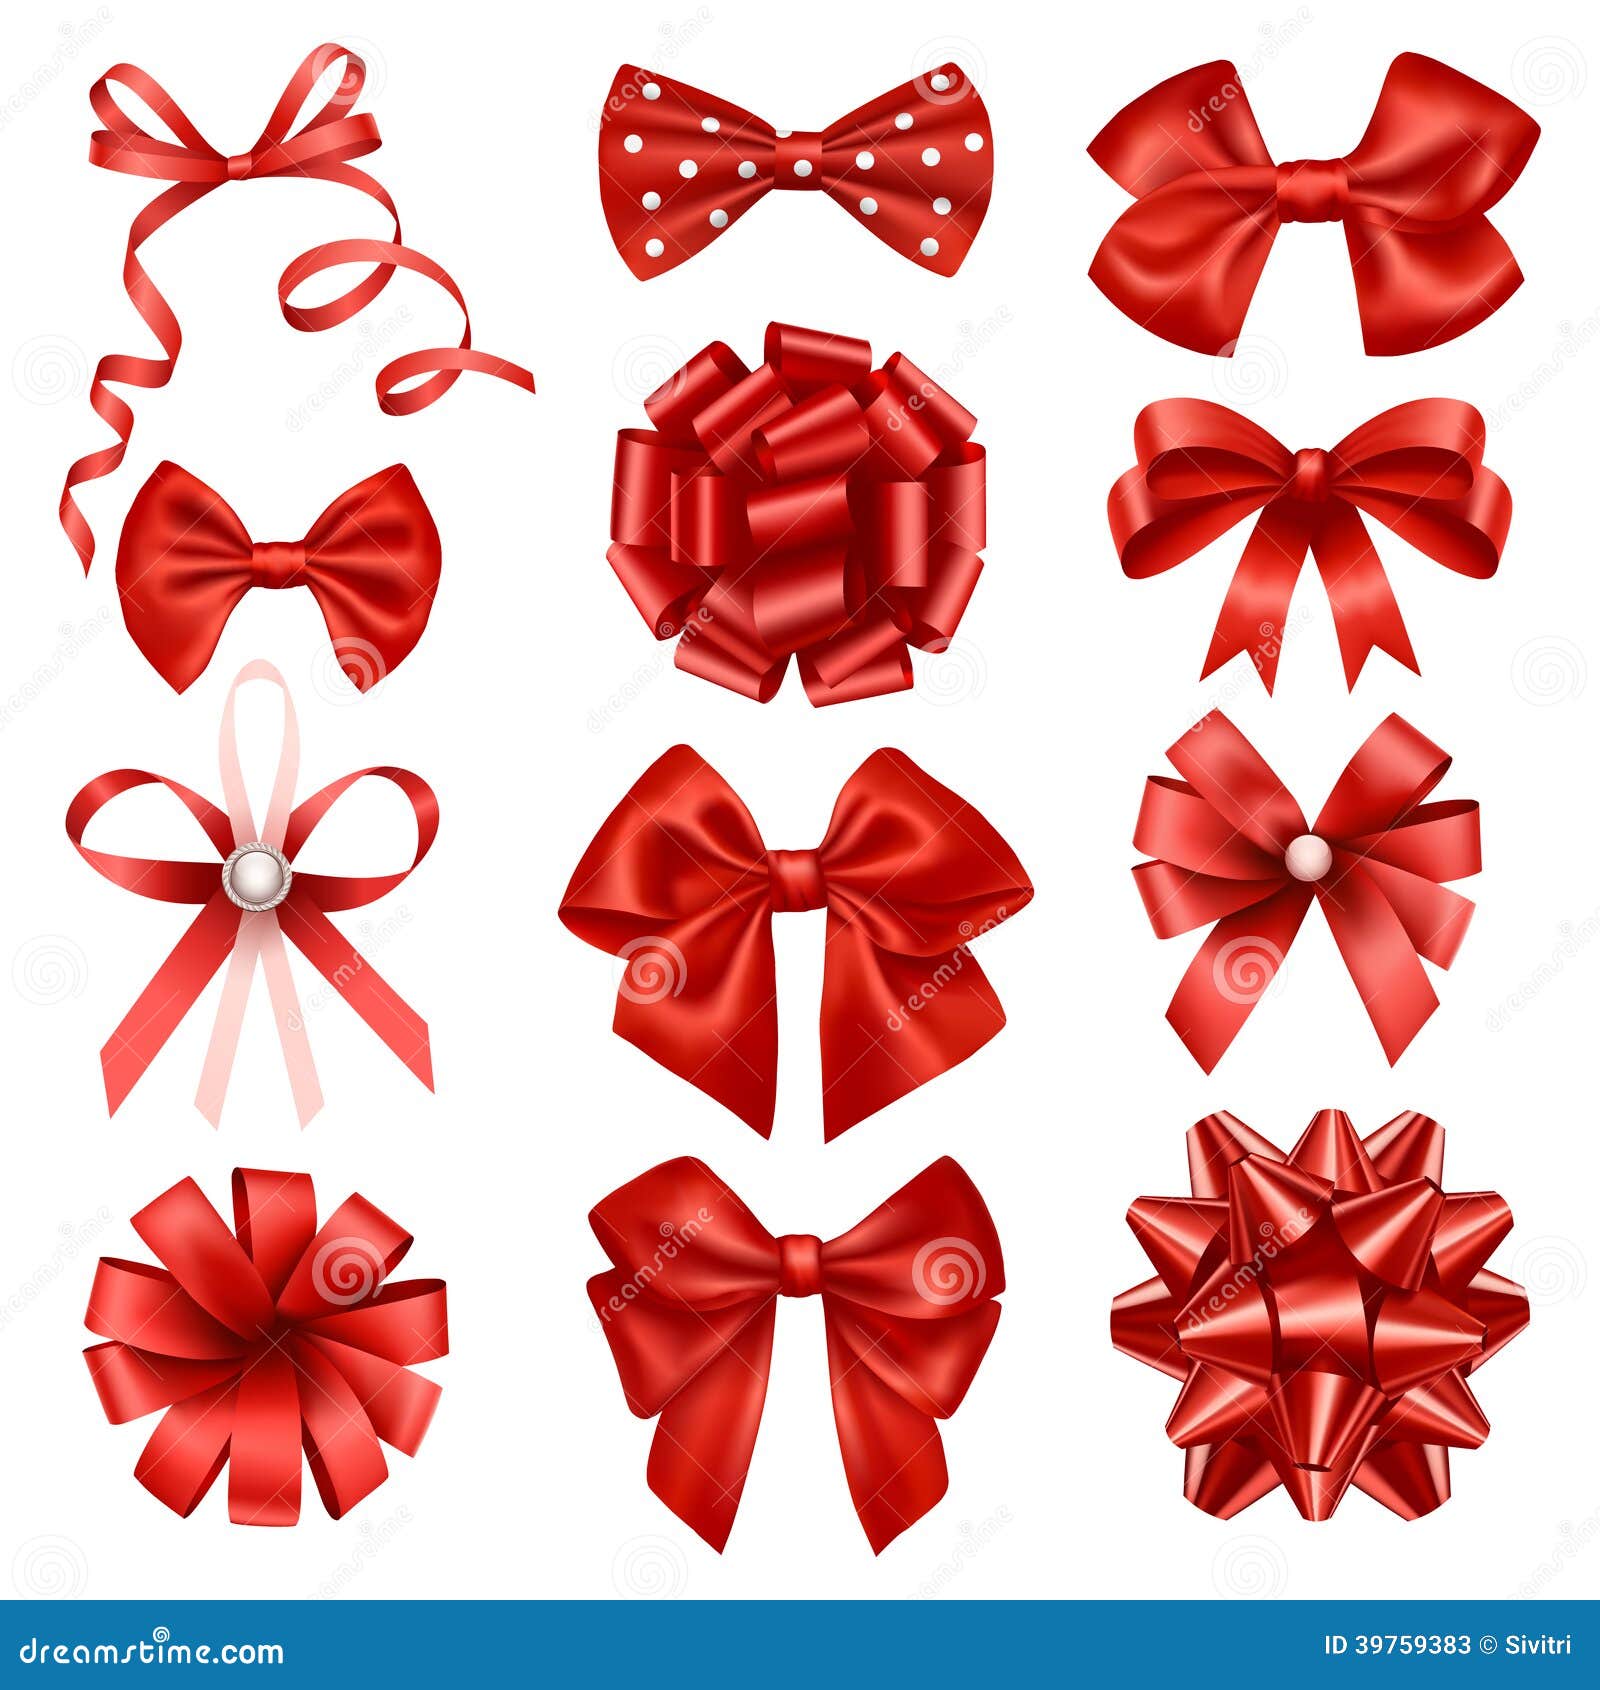 Premium Vector  A set of pink bows with different colors